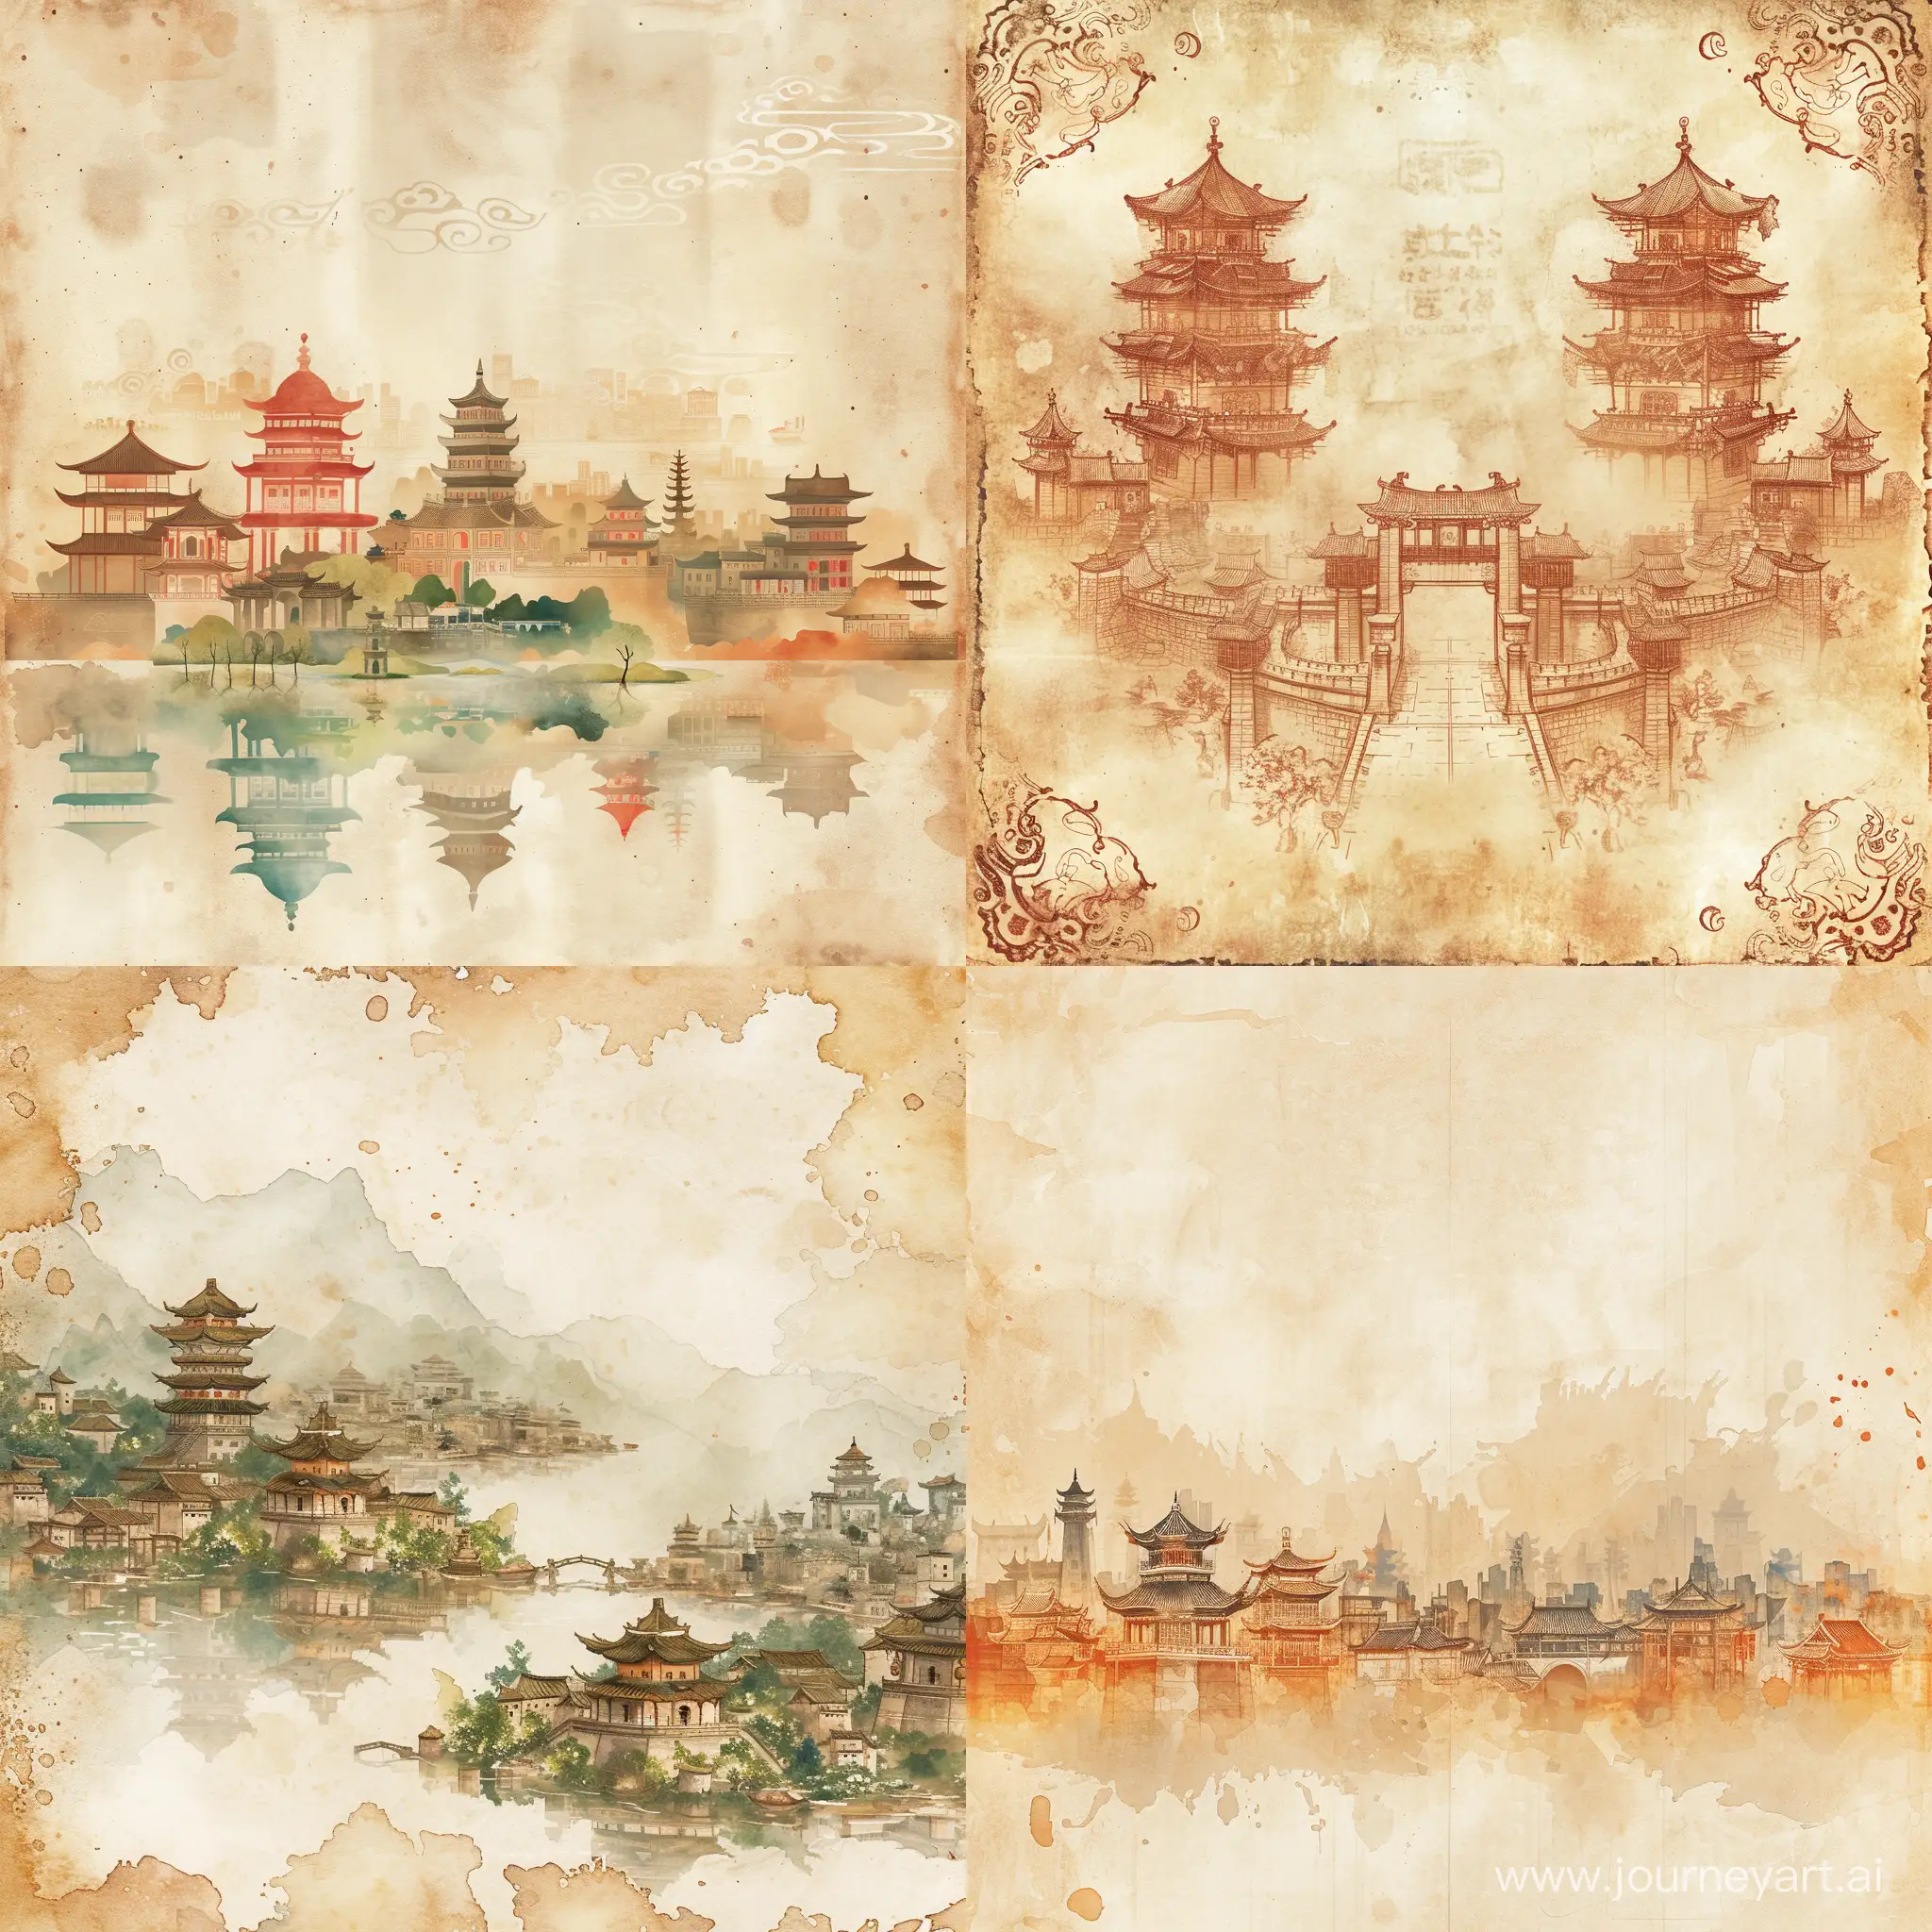 Stylized-Watercolor-Caricature-Ancient-Chinese-Cityscape-on-Textured-Paper